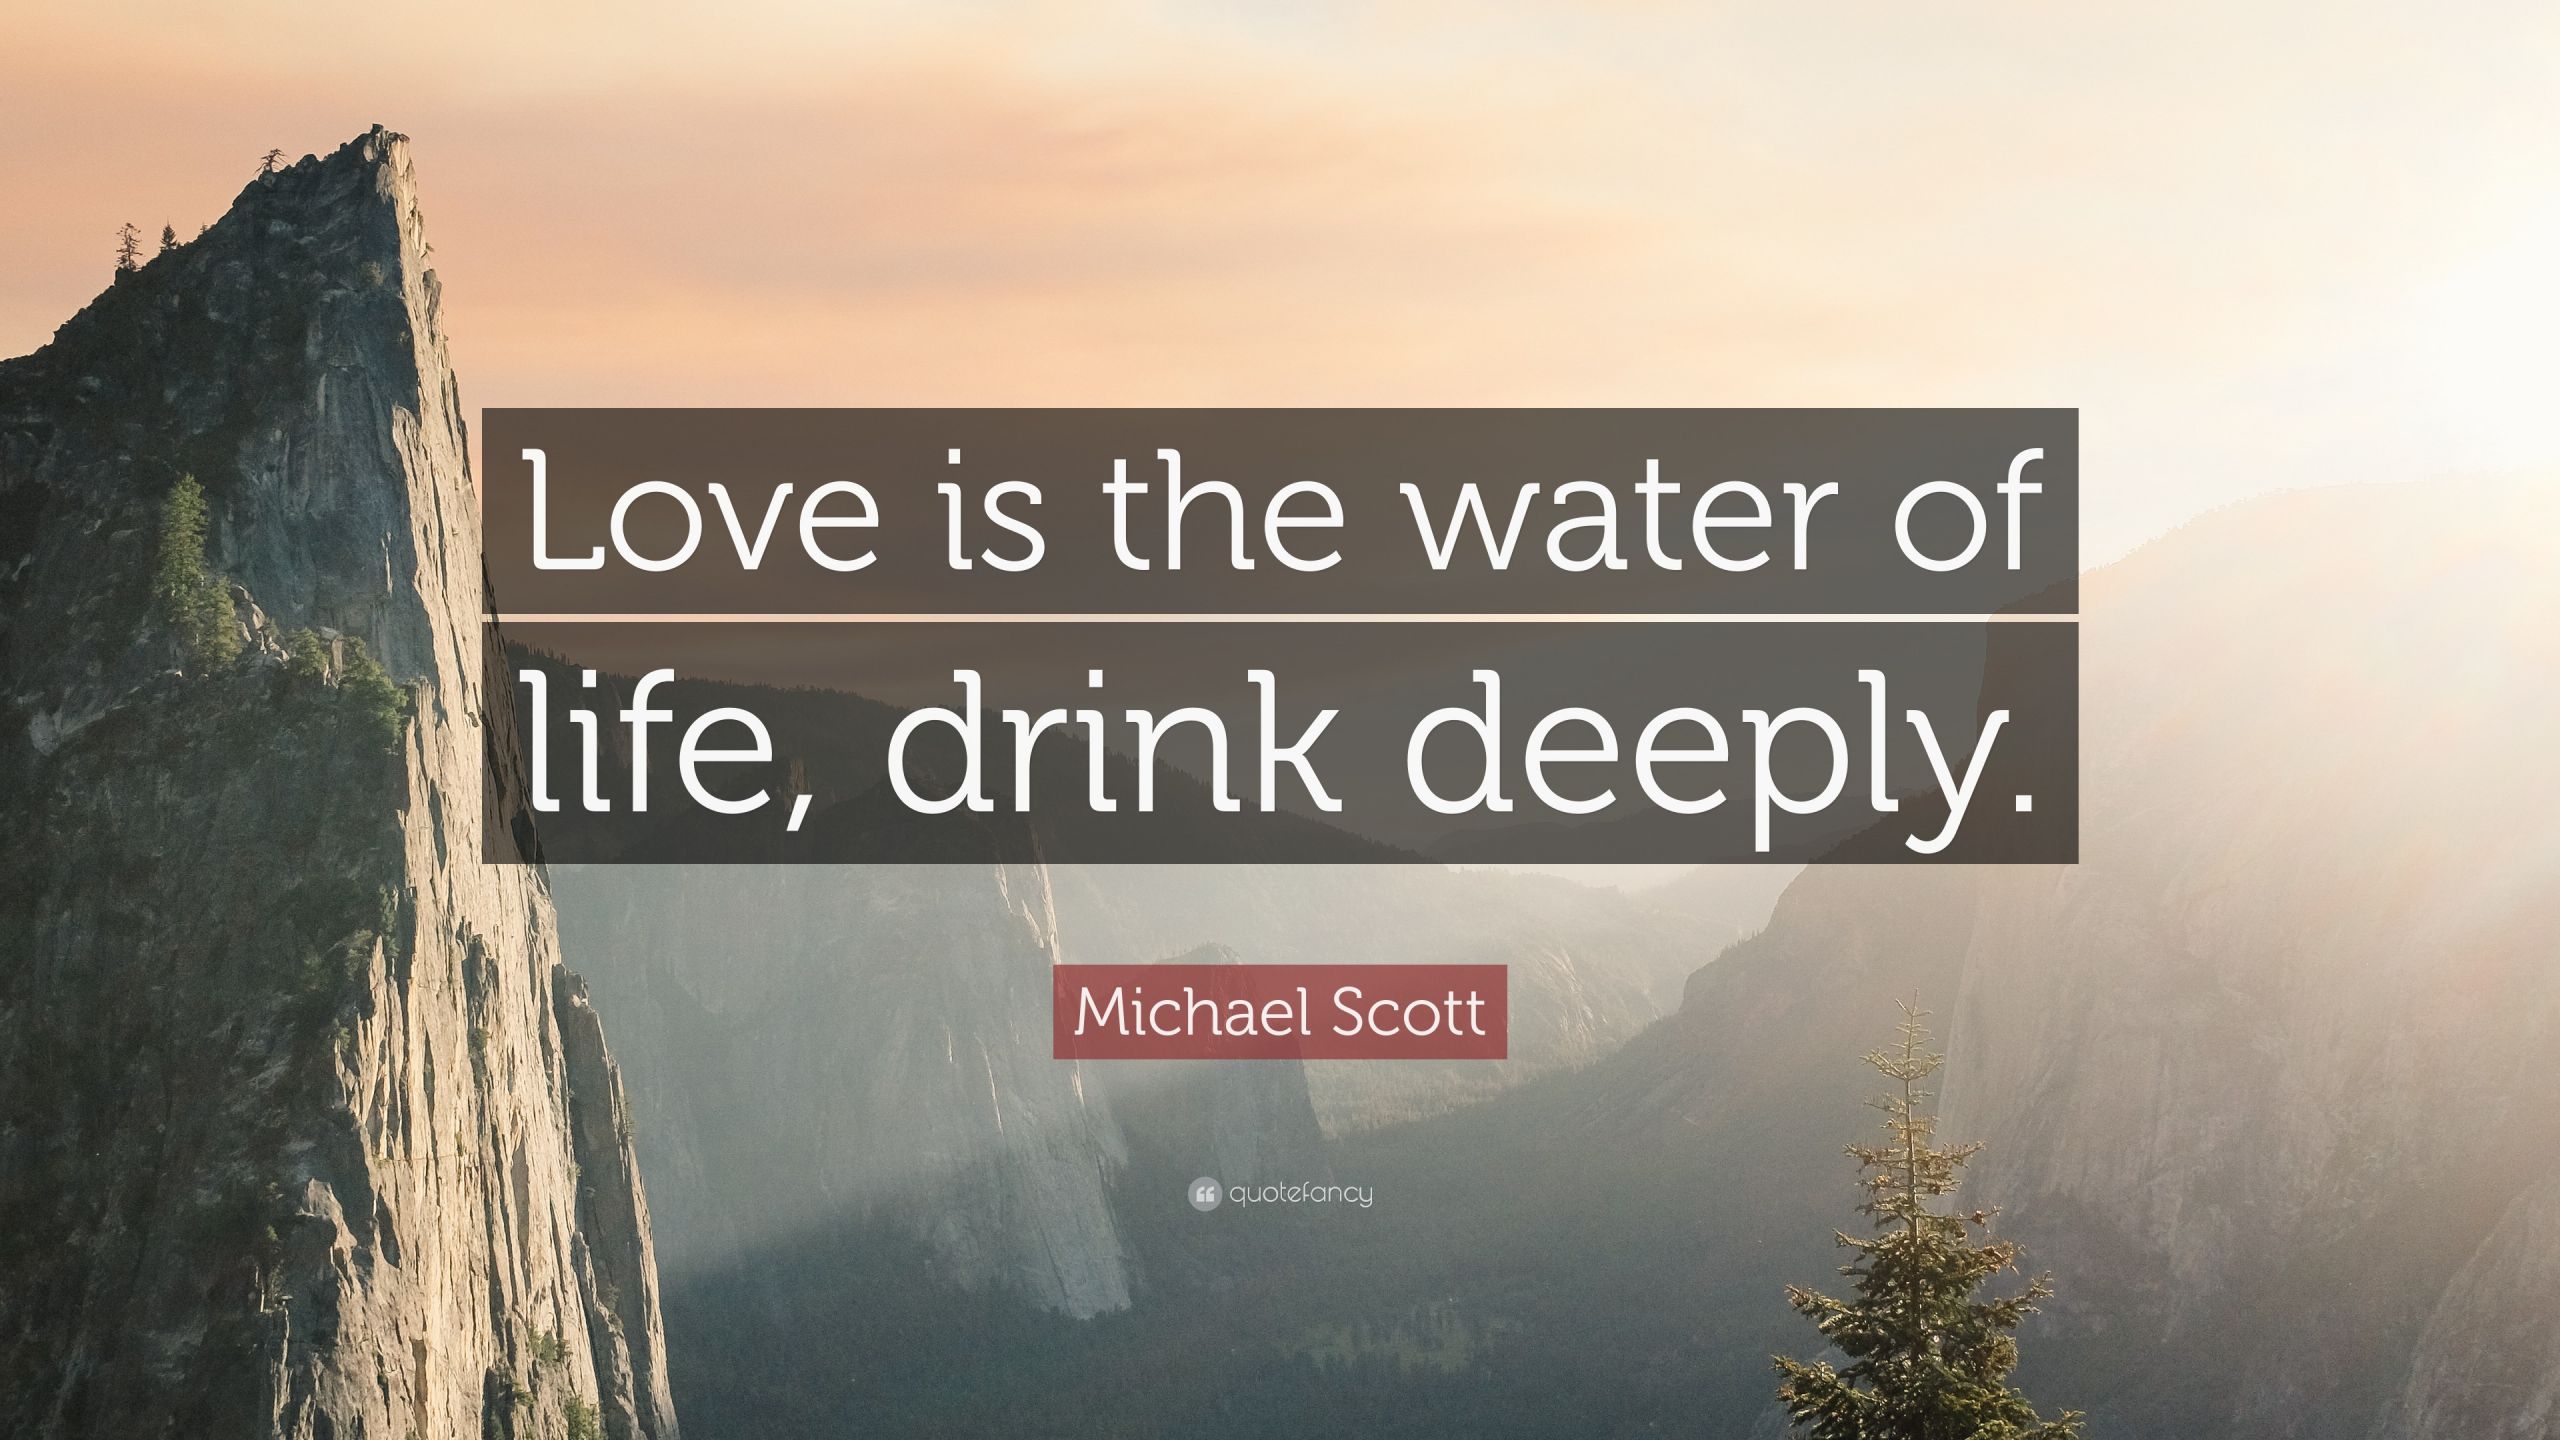 Michael Scott Quotes About Love
 Michael Scott Quote “Love is the water of life drink